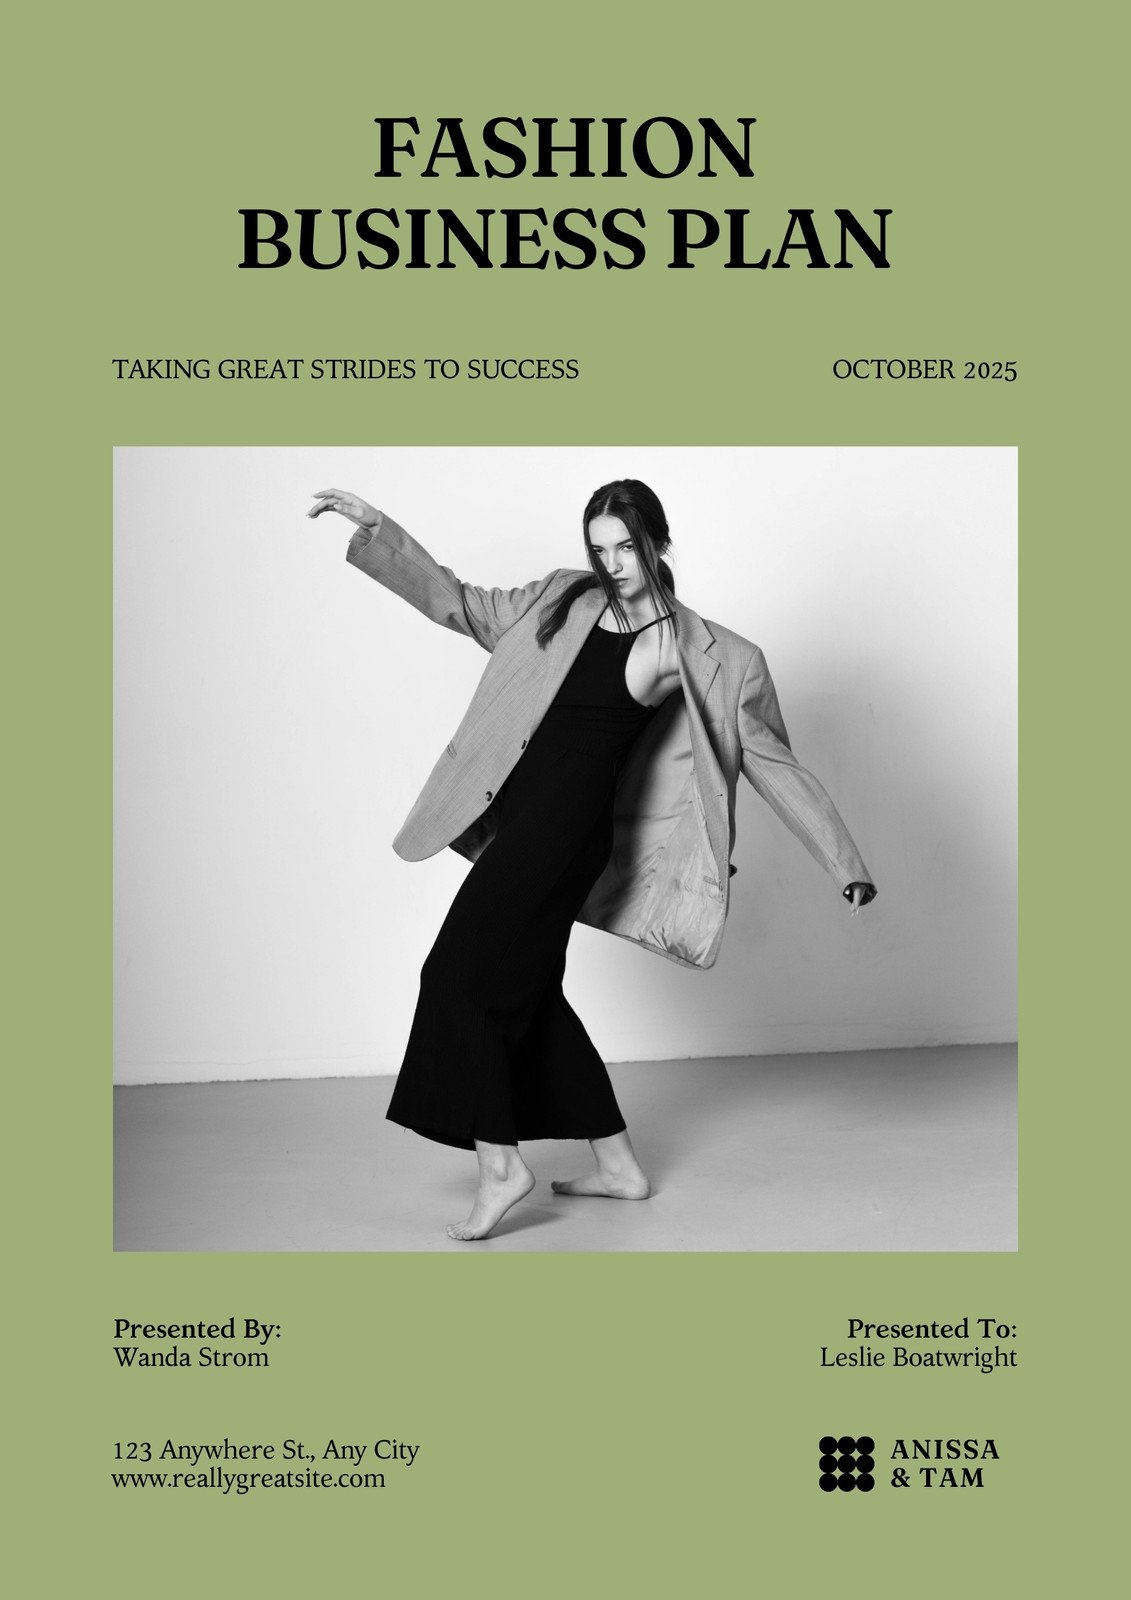 how to plan a fashion business